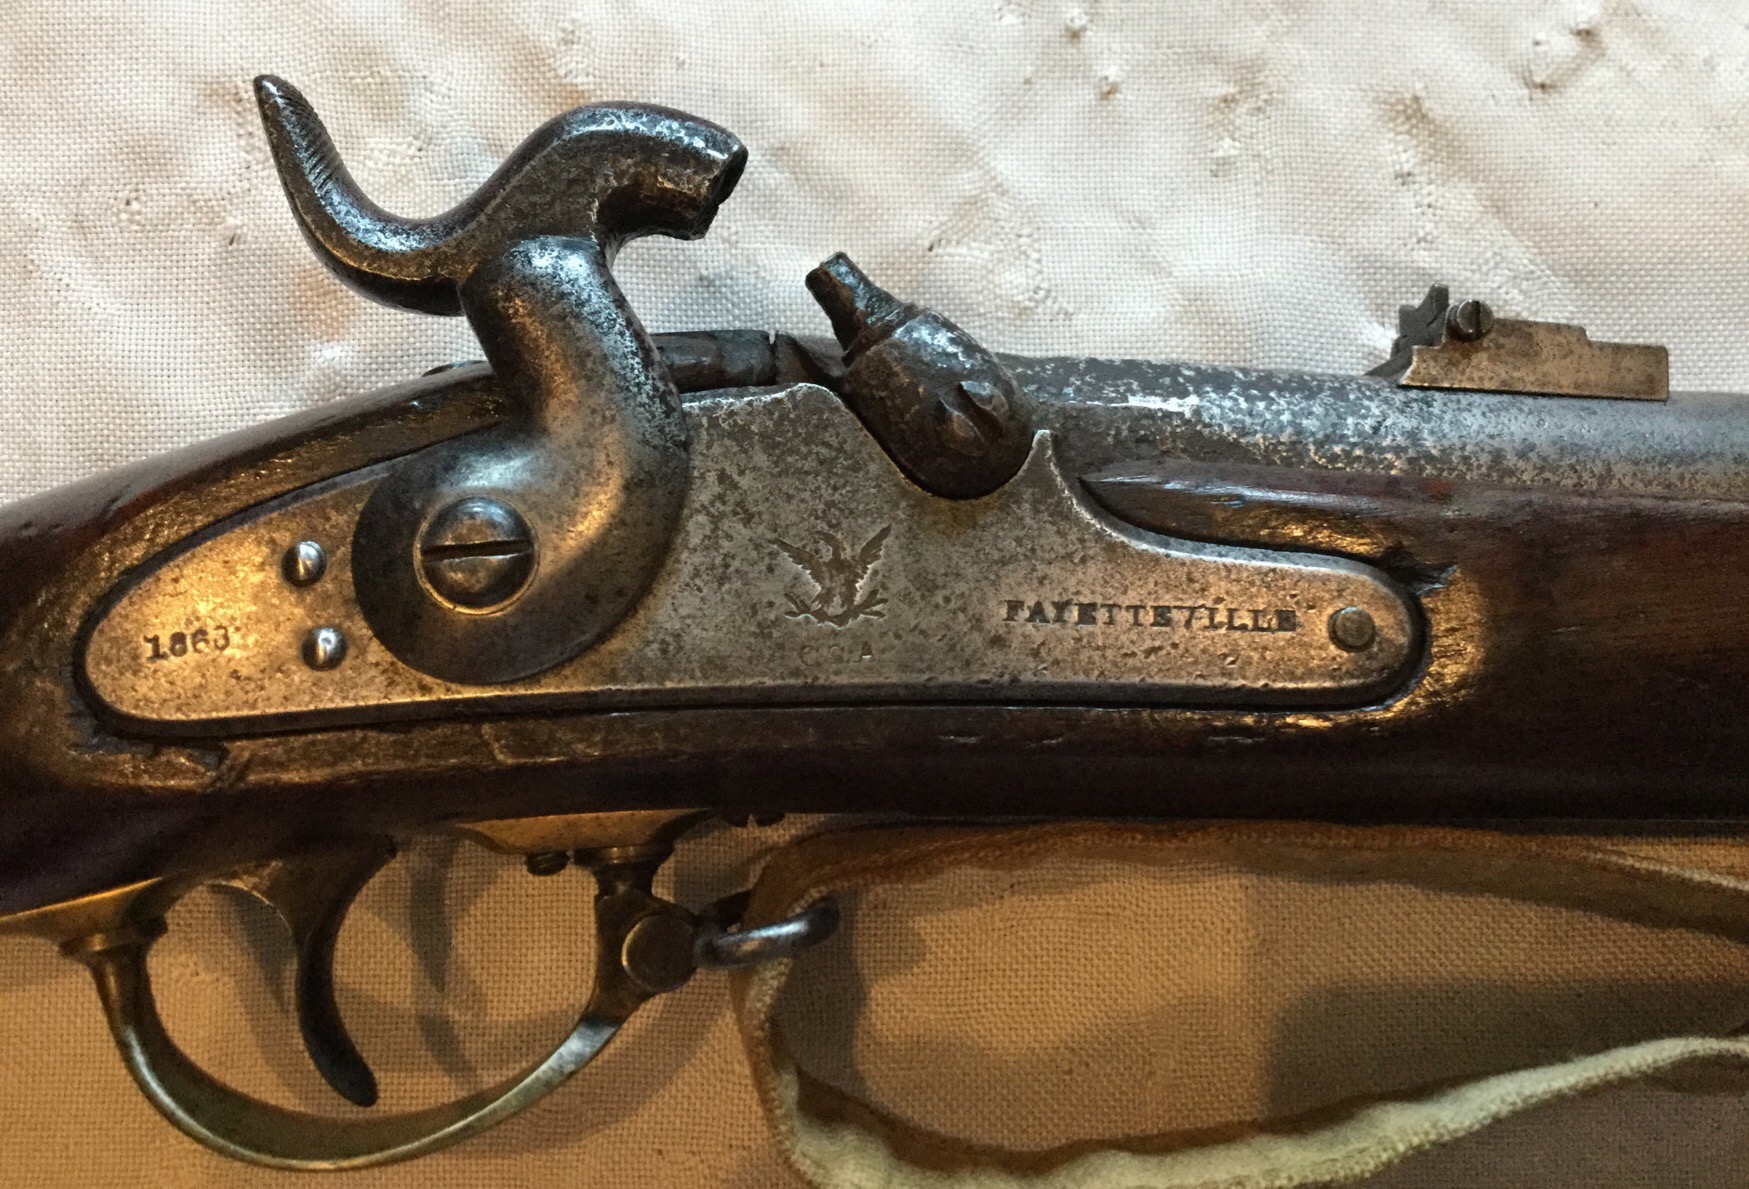 1863 Fayetteville Rifle Lock Plate, Full Cocked